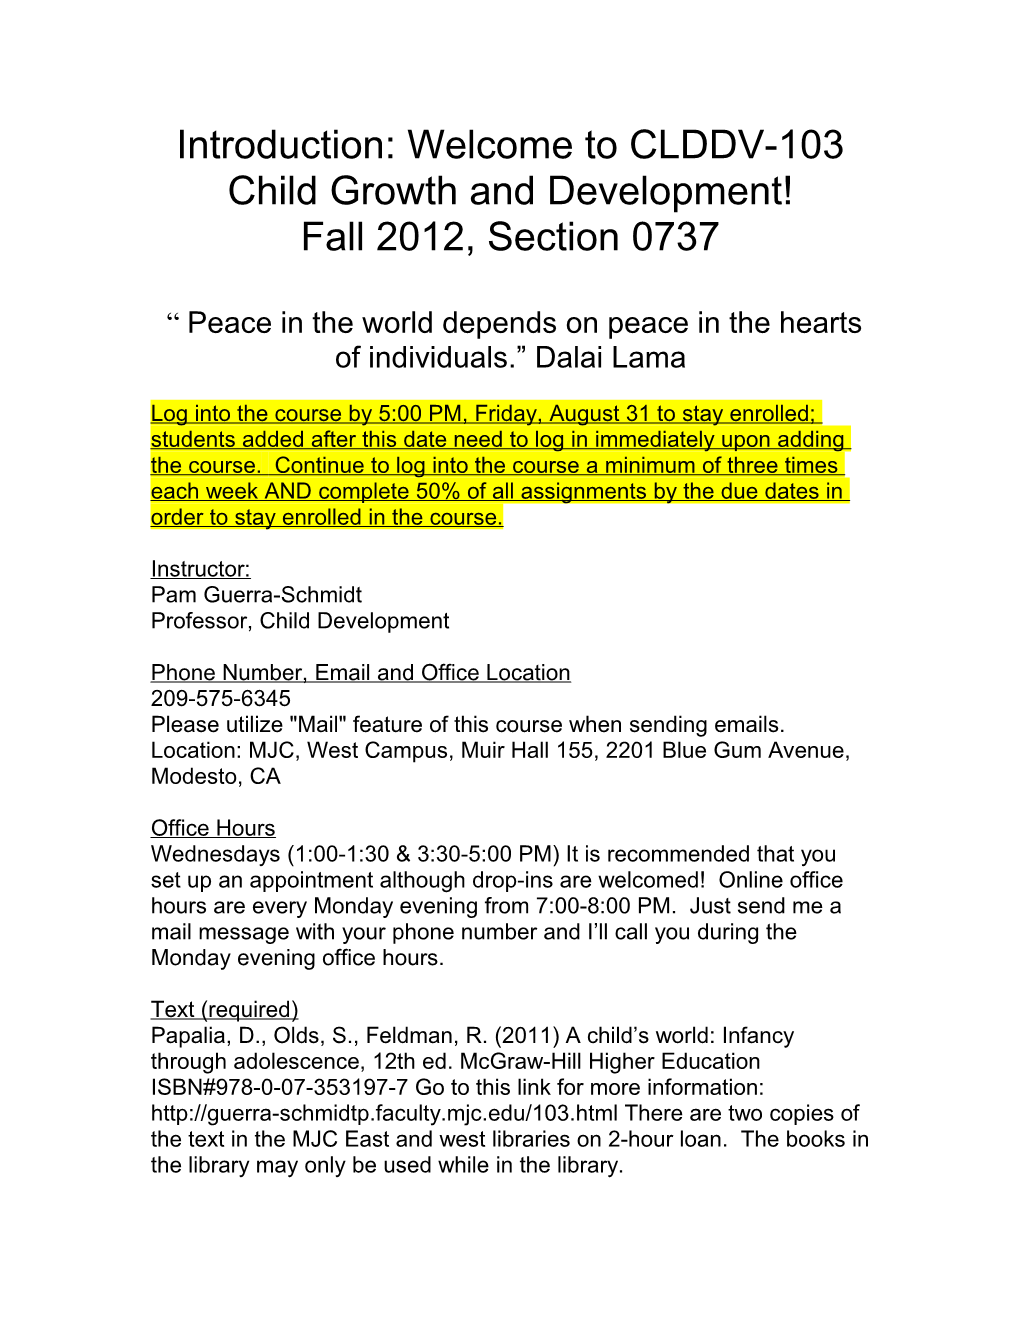 Introduction: Welcome to CLDDV-103 Child Growth and Development